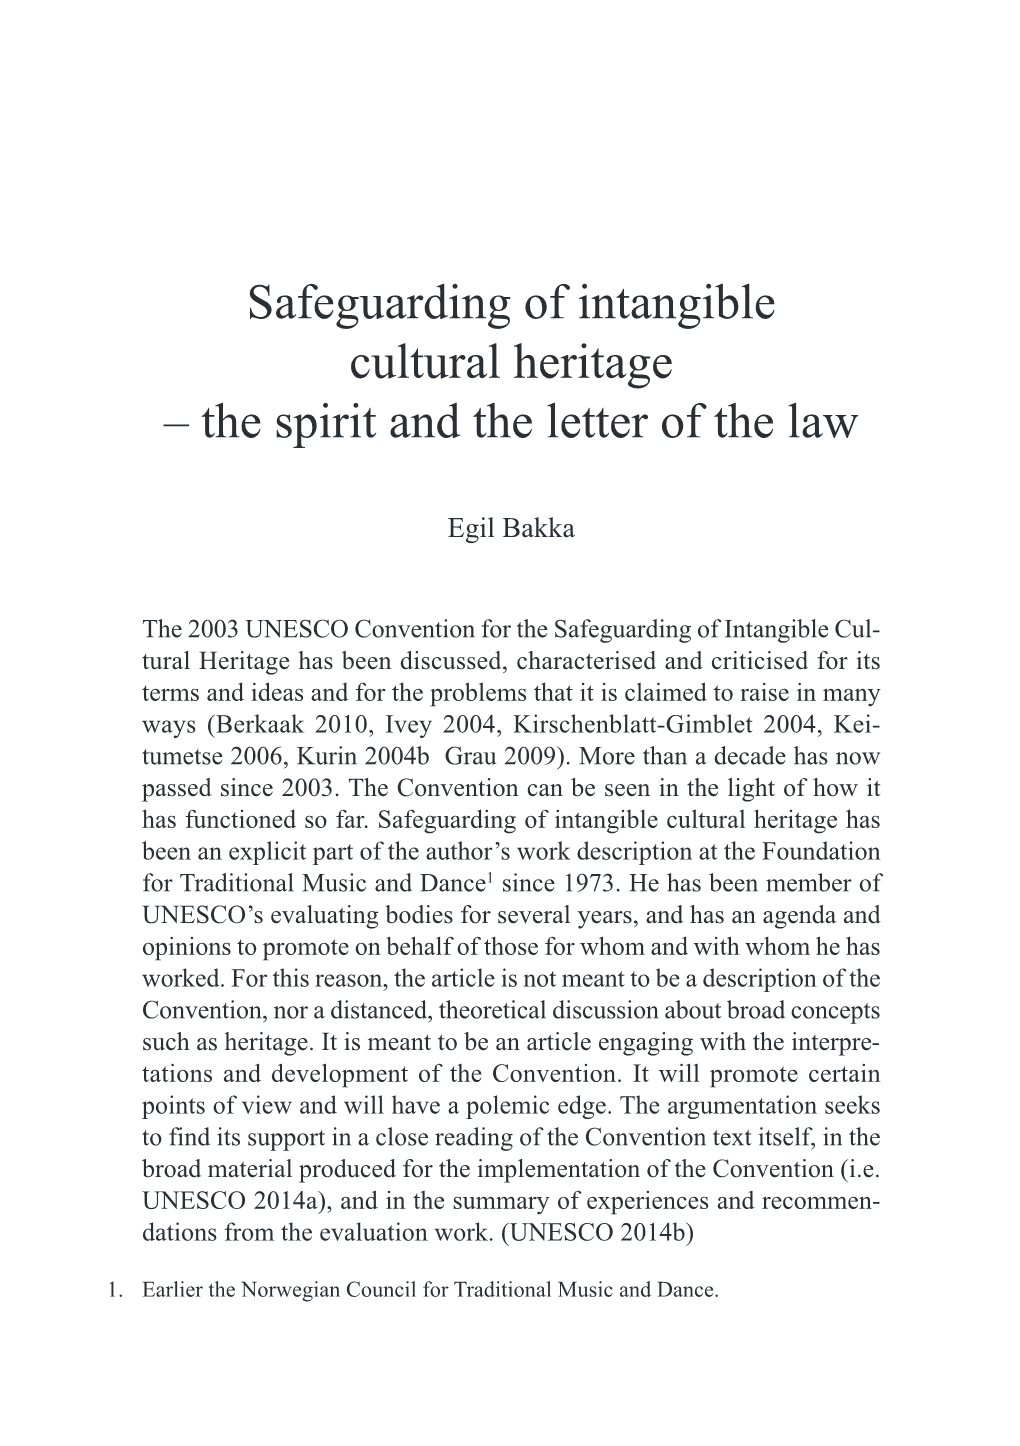 Safeguarding of Intangible Cultural Heritage – the Spirit and the Letter of the Law